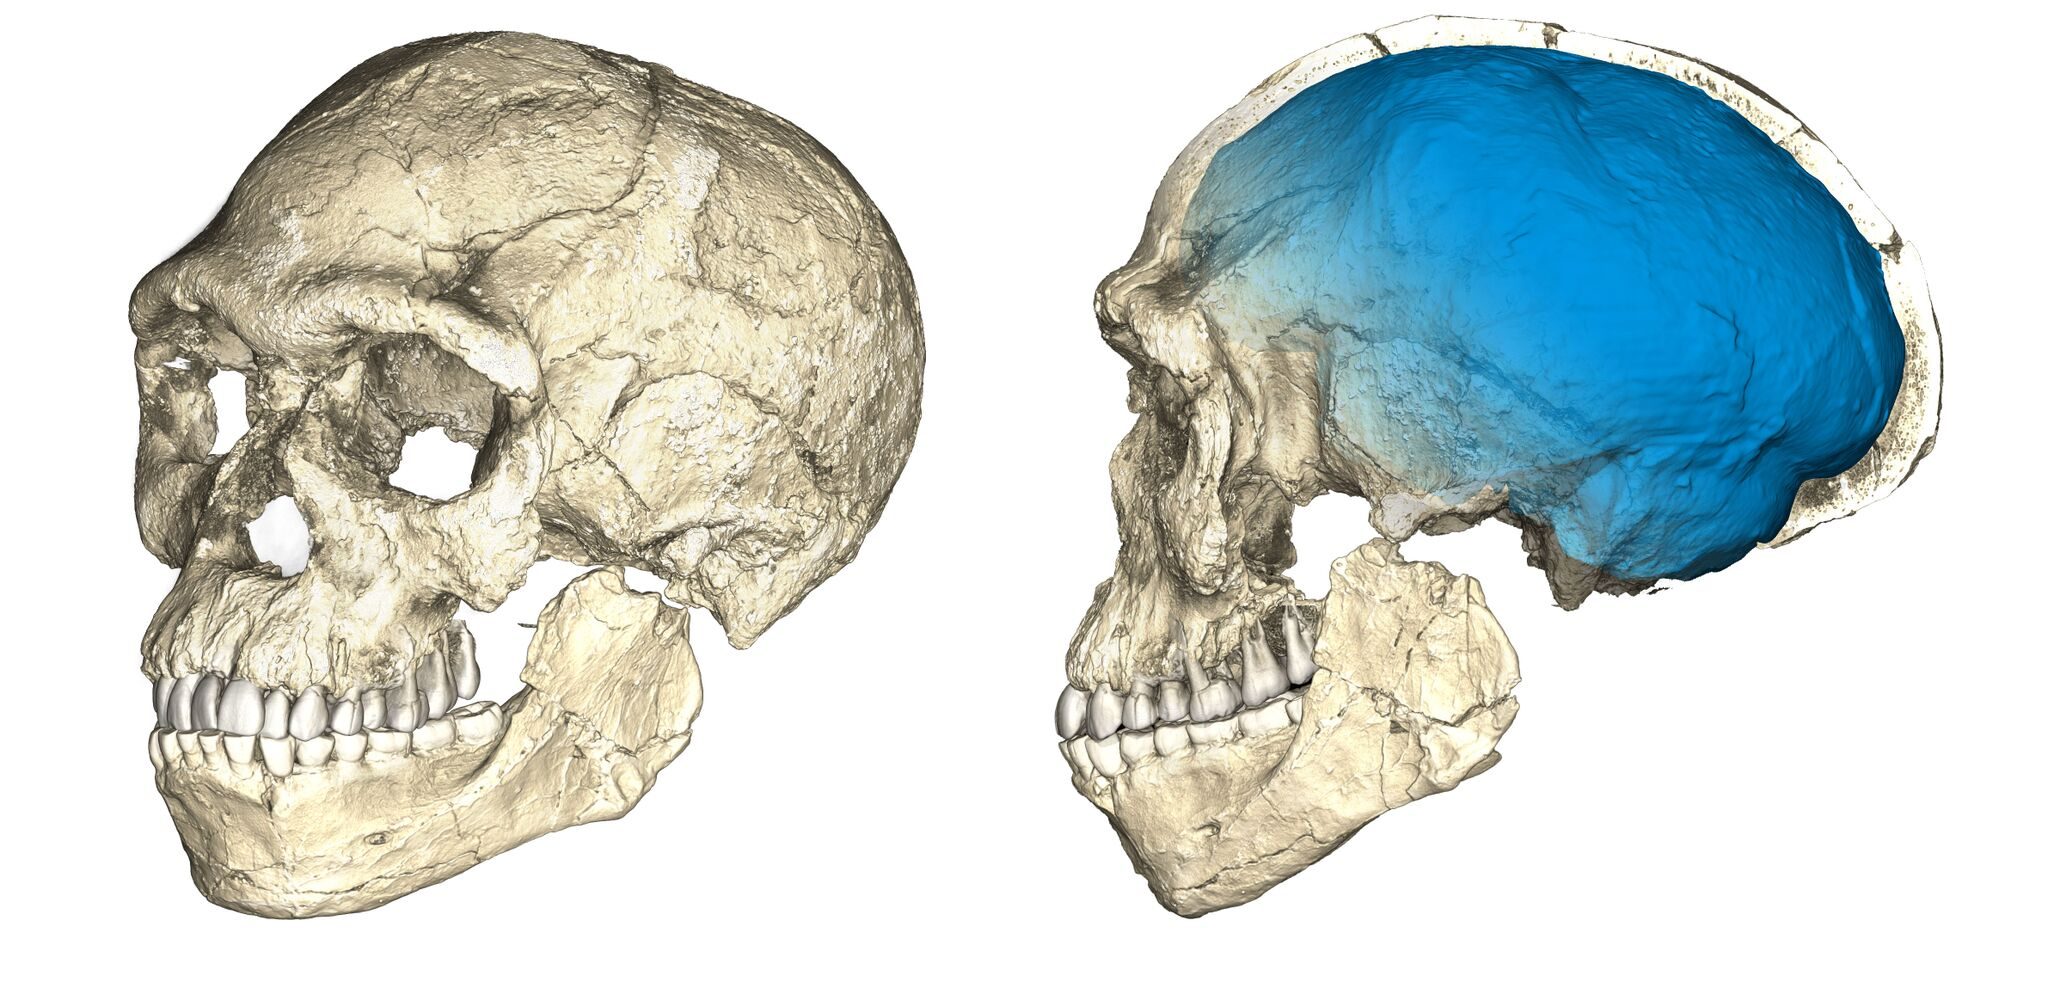 Two views of a composite reconstruction of the earliest known Homo sapiens fossils from Jebel Irhoud (Morocco) based on micro computed tomographic scans of multiple original fossils. Graphic by Philipp Gunz, MPI EVA Leipzig 